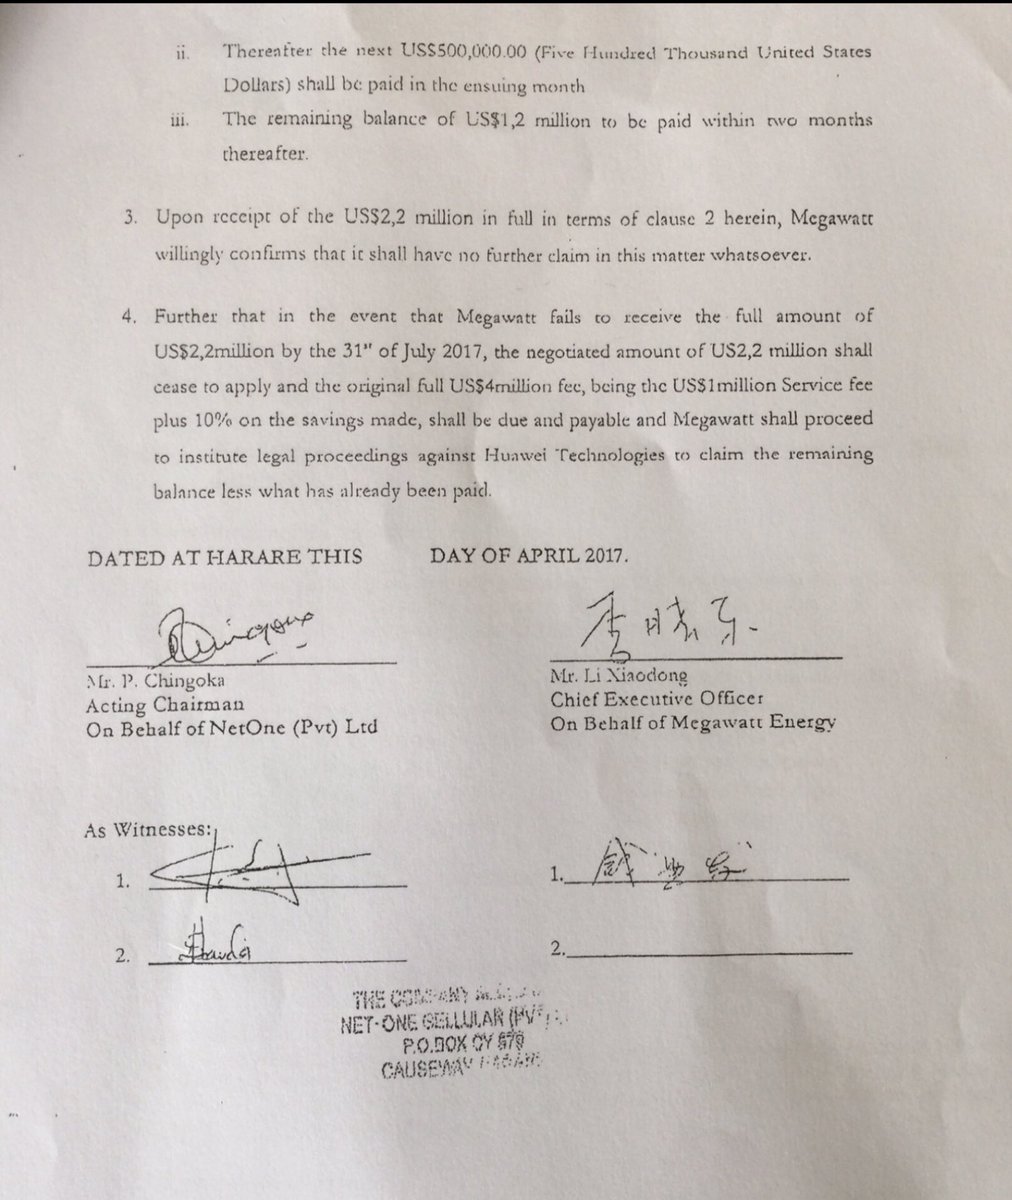 25. Peter Chingoka, who signed the illegal agreement, was a non-executive Director of MetBank, whilst Sibusisiwe Ndhlovu, an ex-MetBank Director, corruptly appointed CFO of  @NetOneCellular & K. Nyashanu recruited from ex-ICT Minister’s company, Tarcon witnessed it.  @matandamoyo